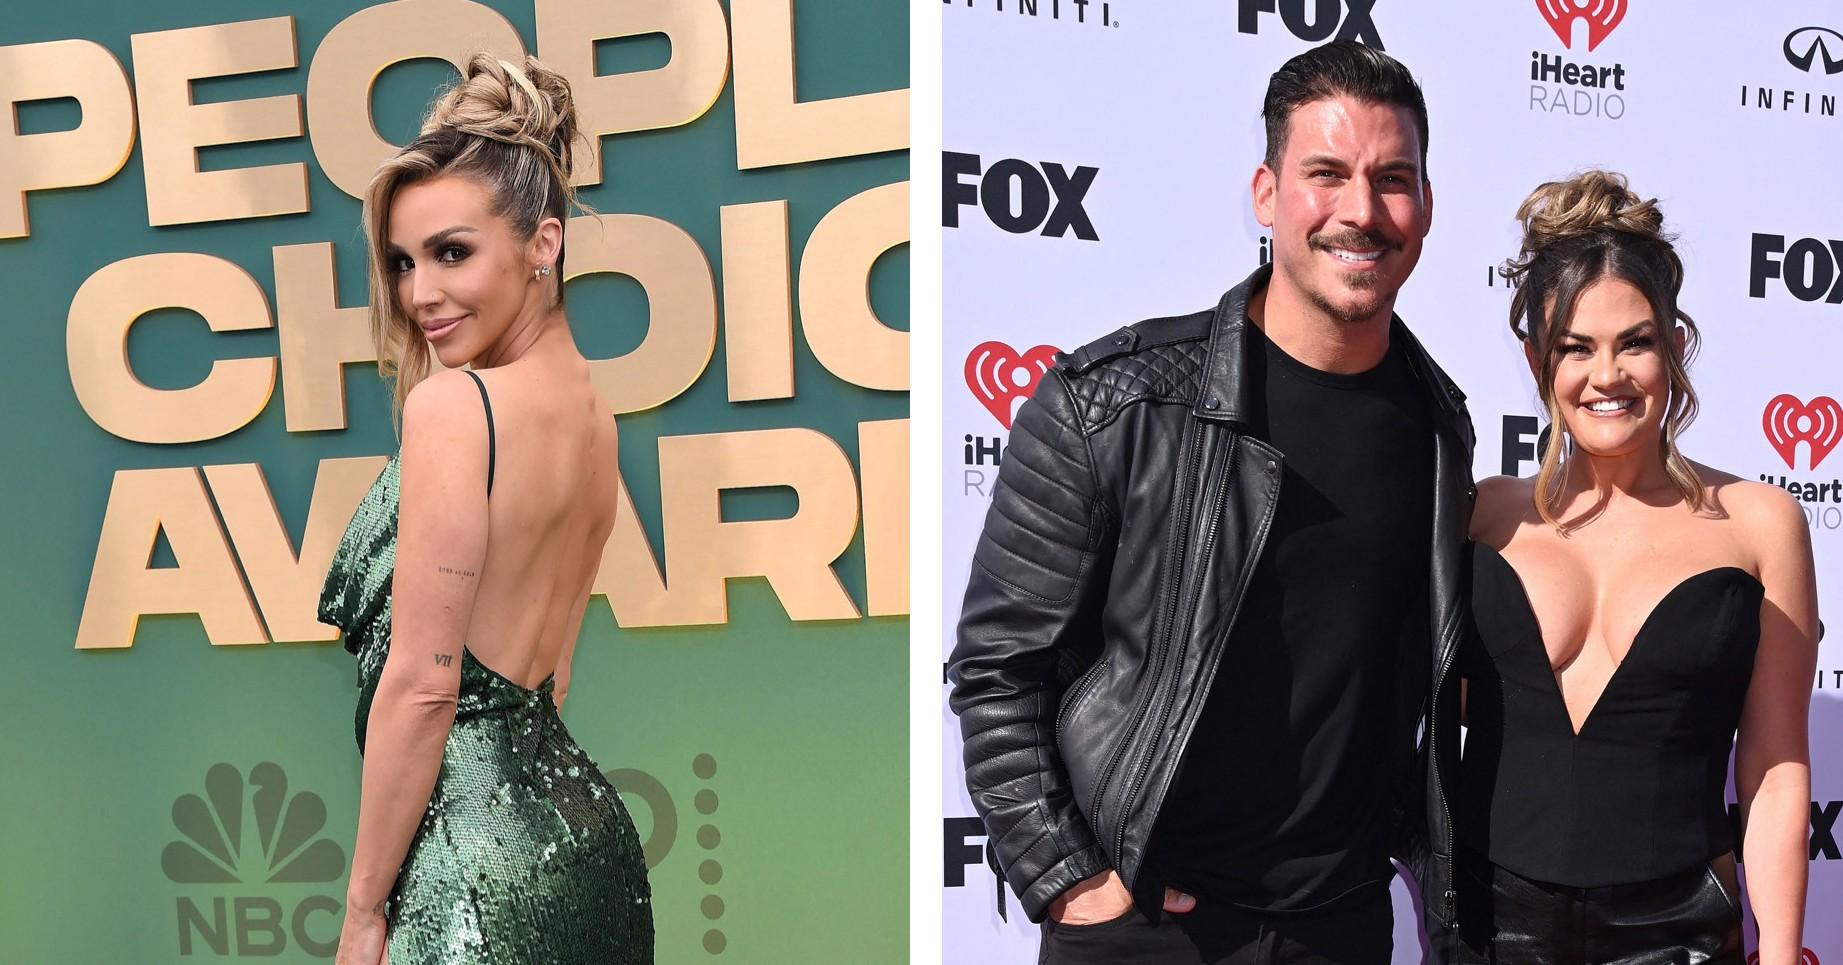 Scheana Shay Wants 'Better' For Brittany Cartwright After Jax Taylor